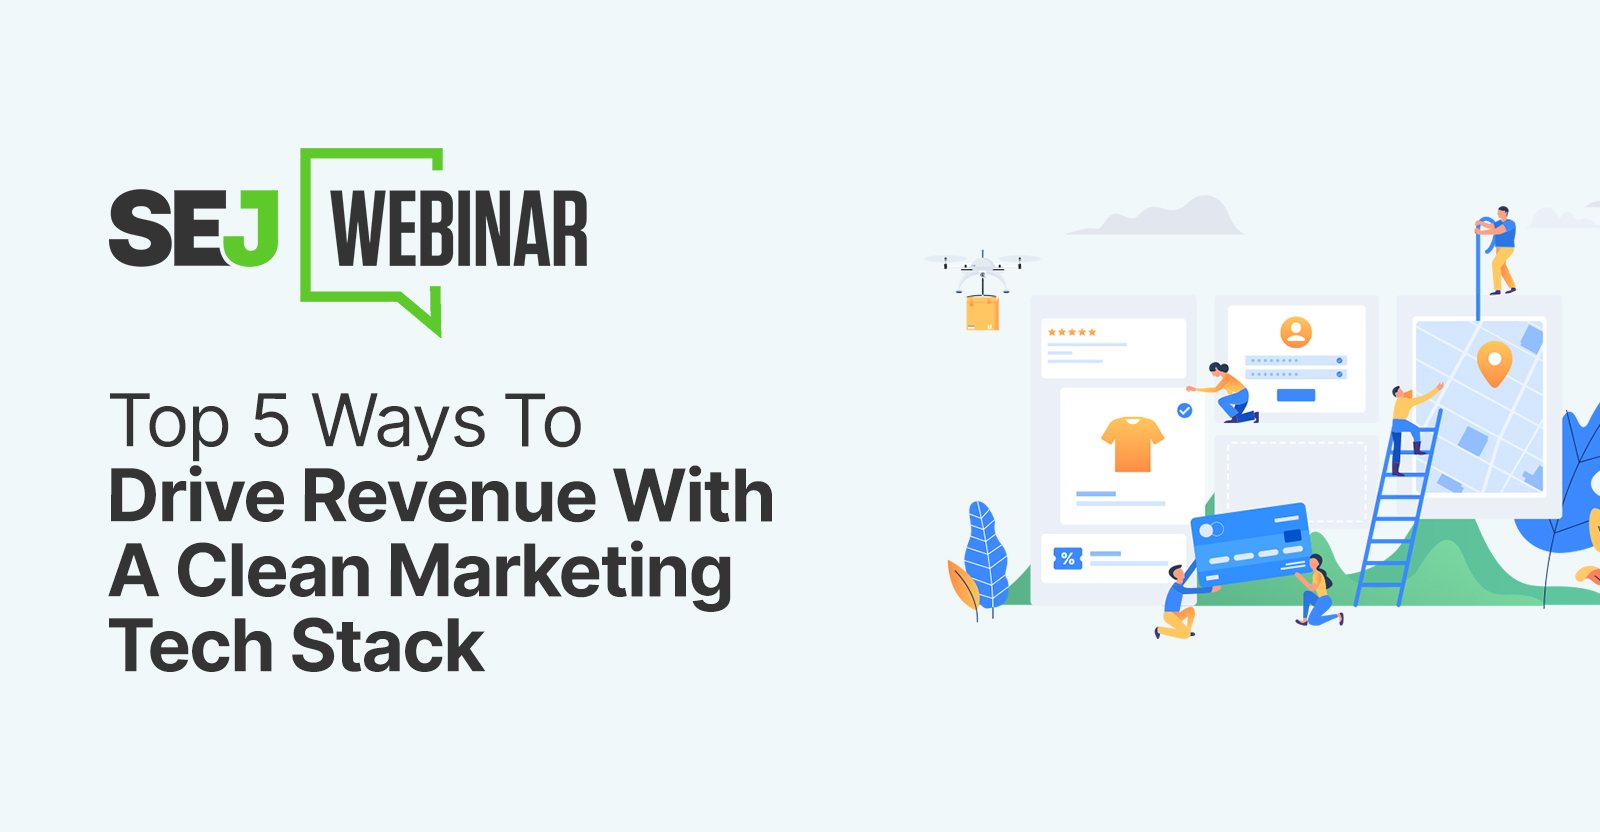 Ecommerce: Top 5 Ways To Drive Revenue With A Clean Marketing Tech Stack [Webinar] via @sejournal, @hethr_campbell